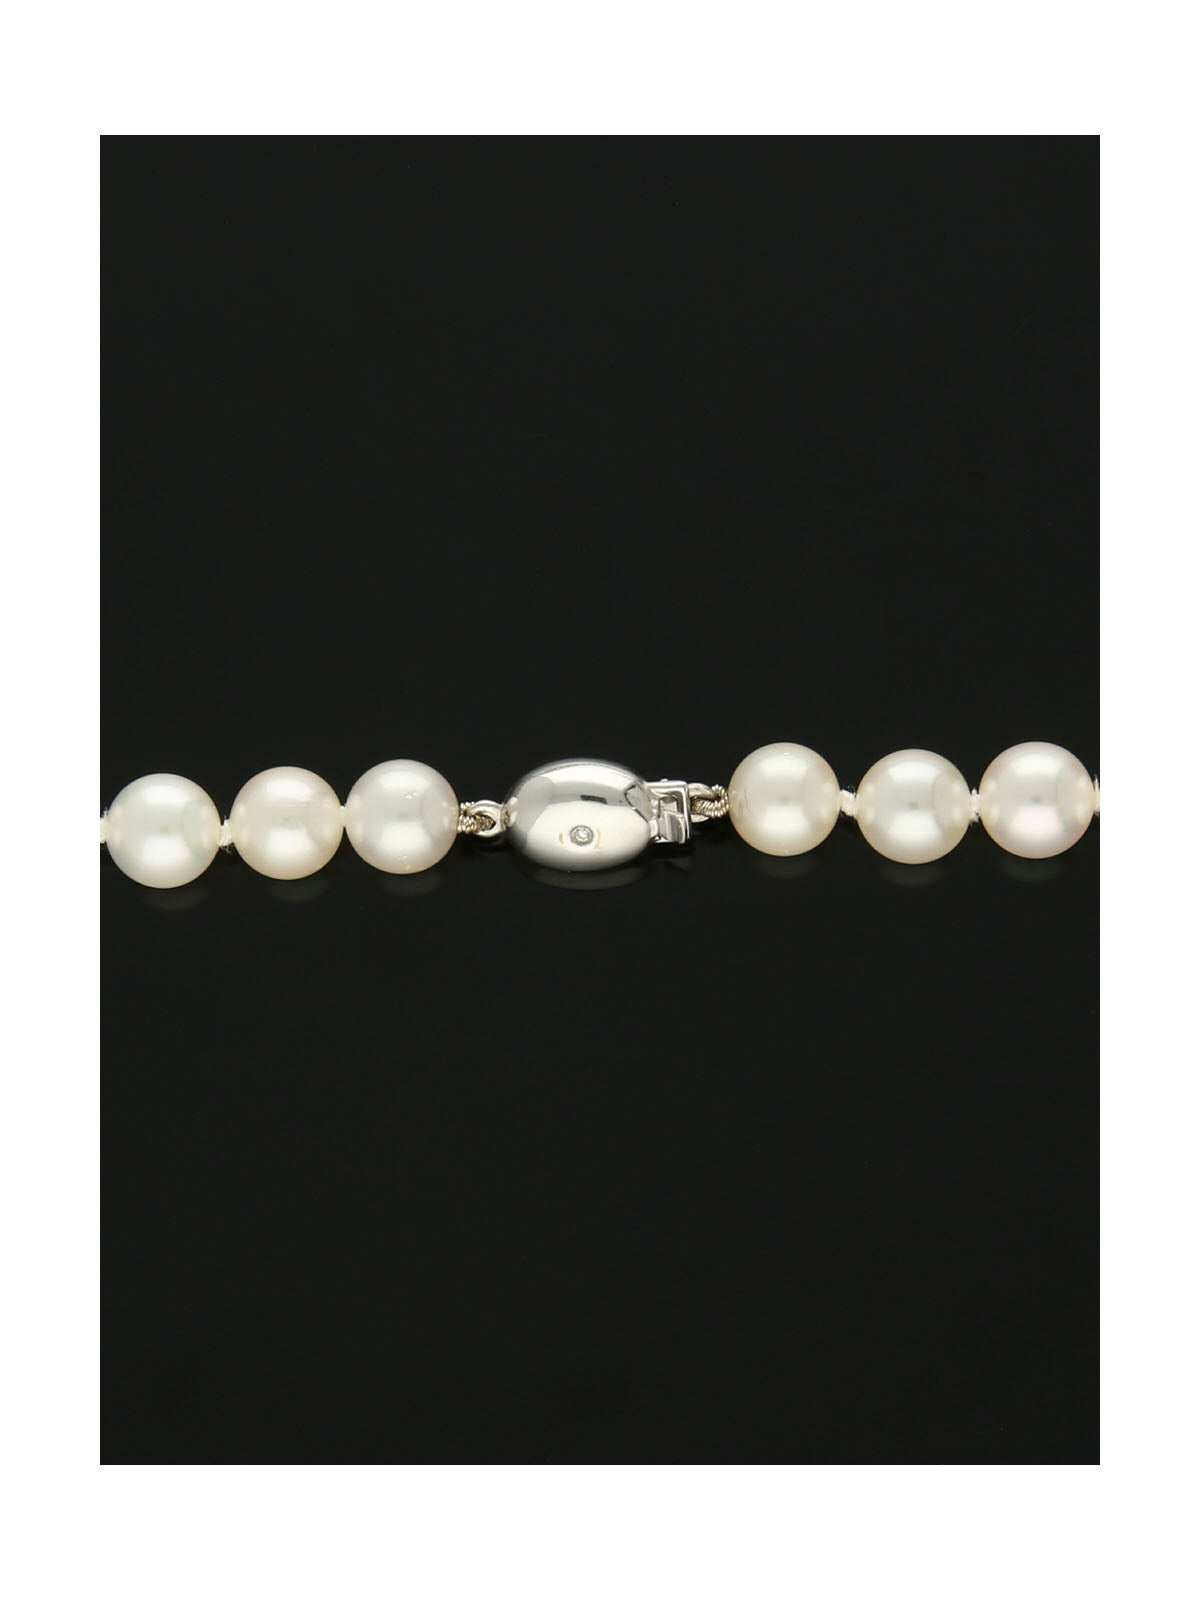 Single Row 7mm Cultured Pearls with 18ct White Gold Diamond Set Clasp